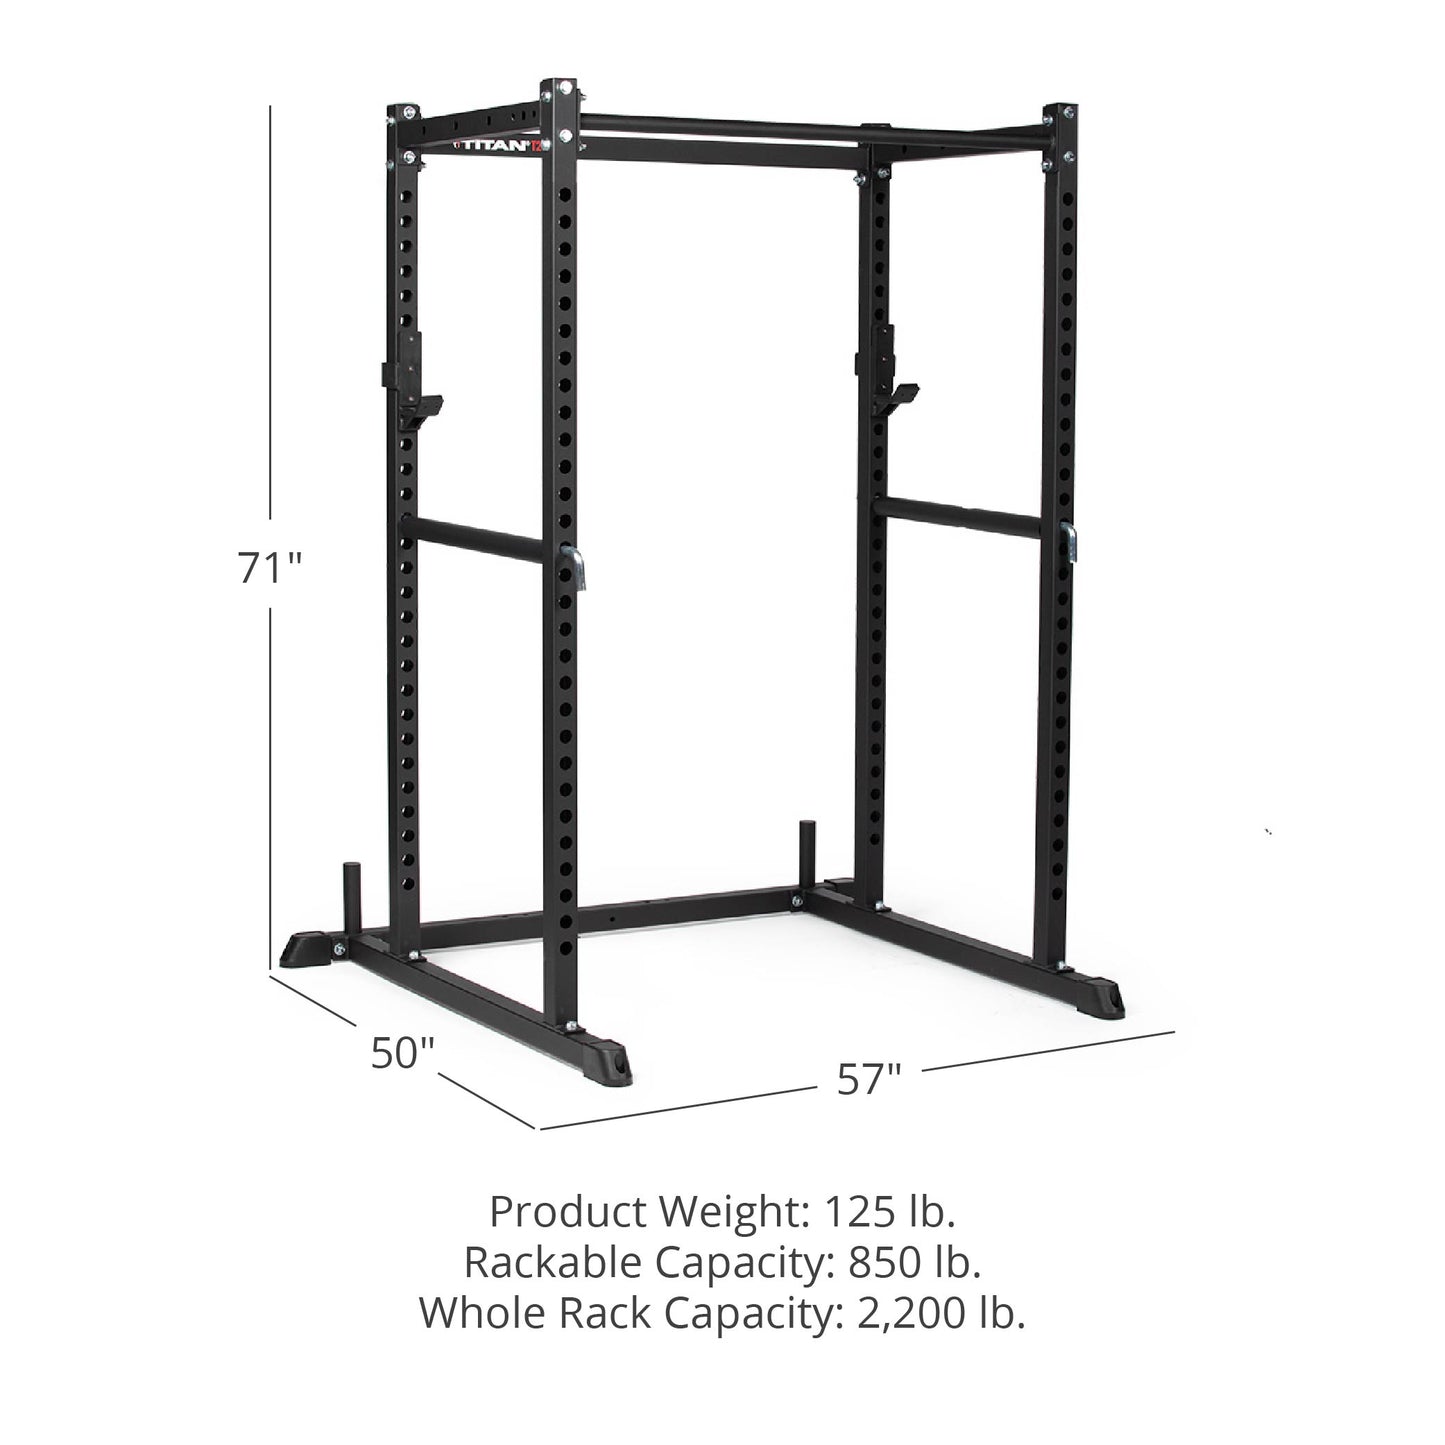 T-2 Series Power Rack | Image Shows Height of 71", Length of 50", Width of 57". Product Weight: 125 lb. Rackable Capacity: 850 lb. Whole Rack Capacity: 2,200 lb. - view 12